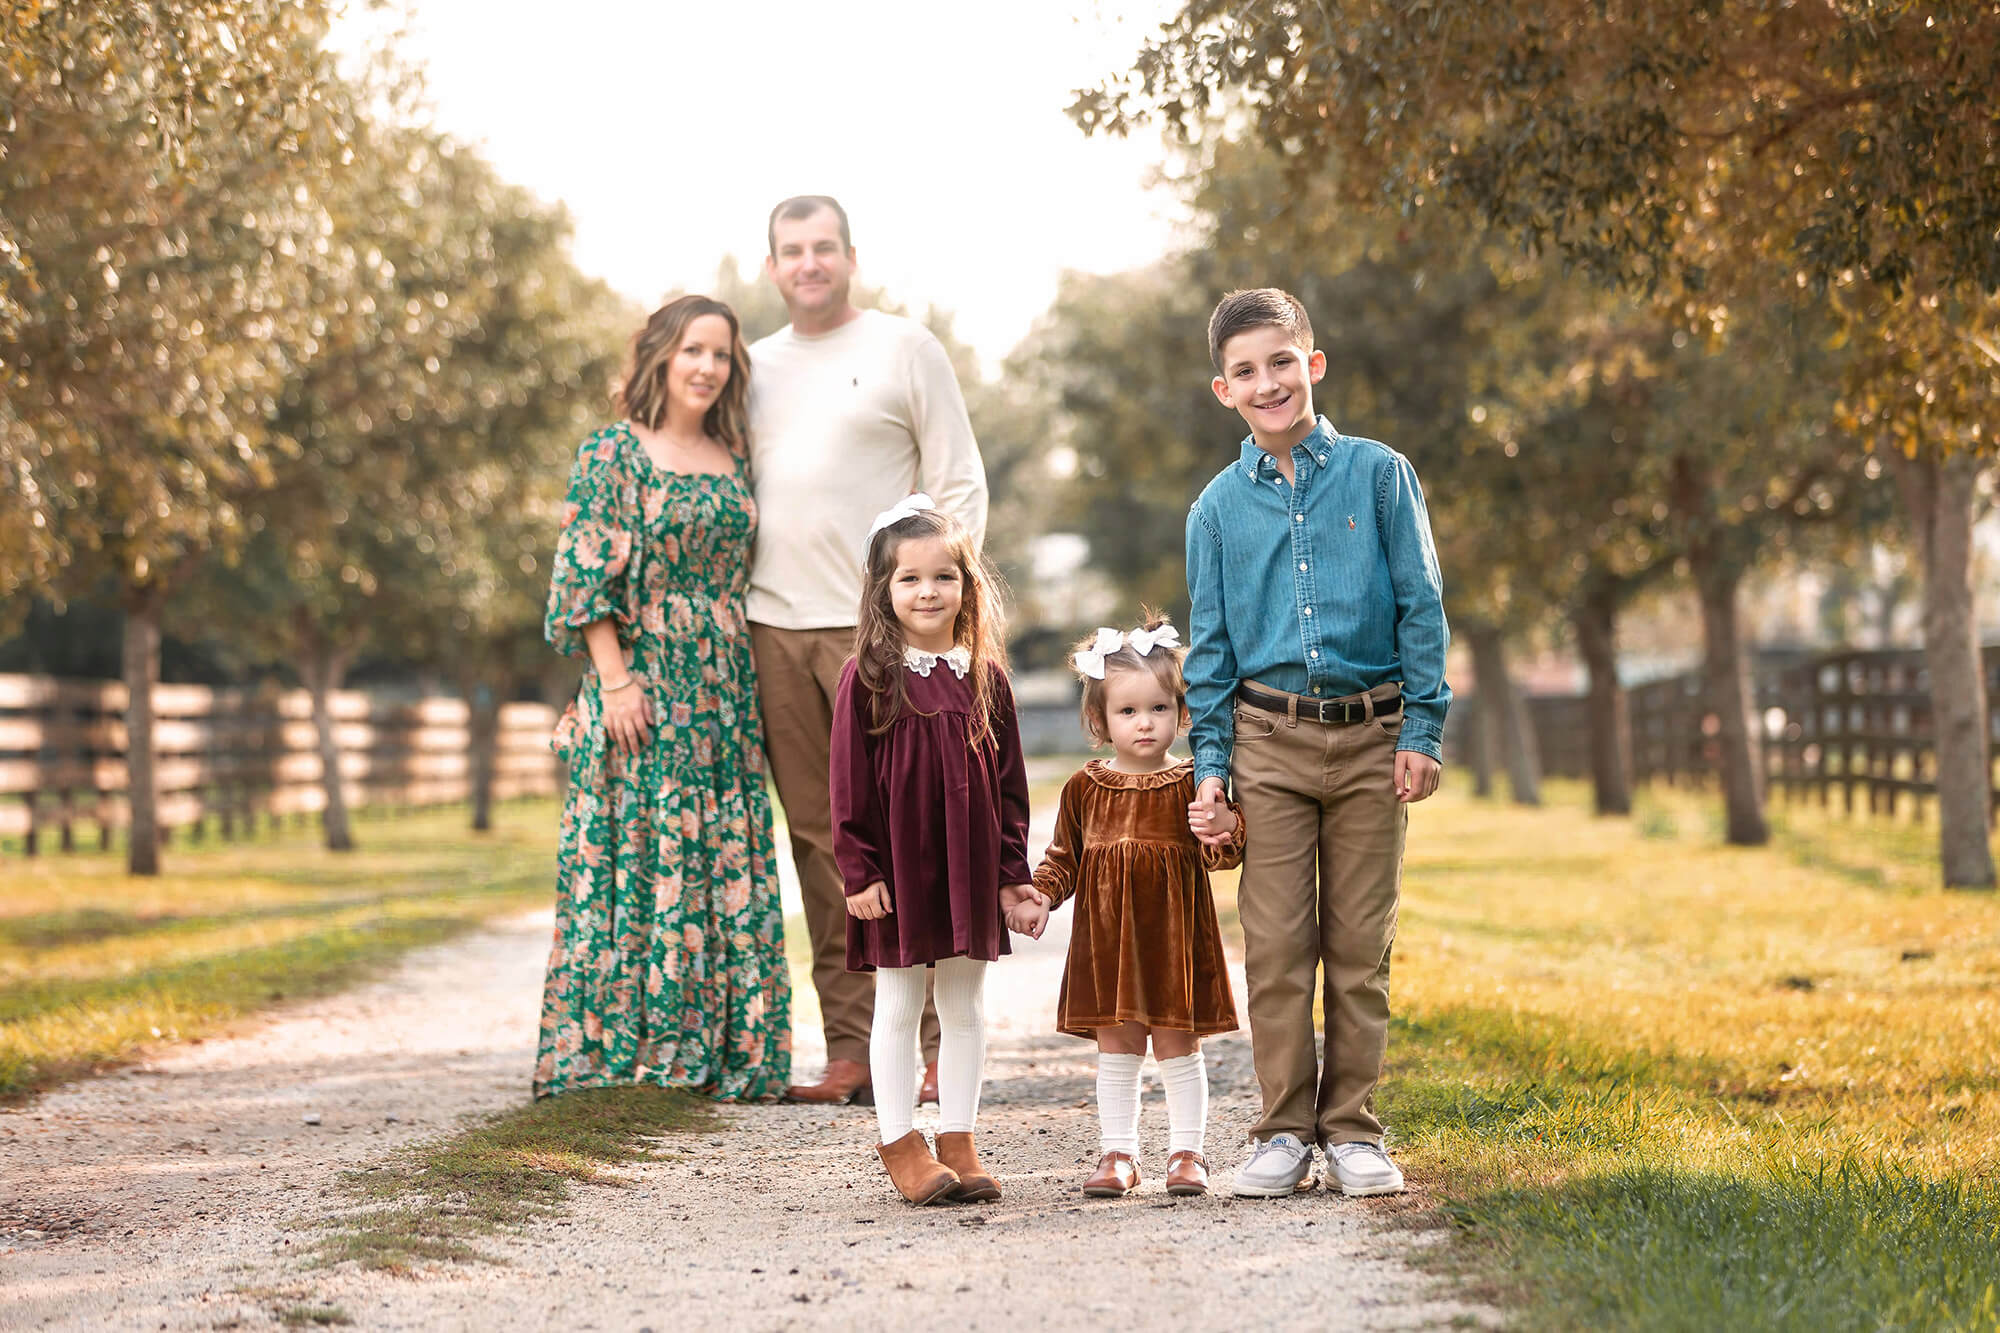 Beautful family enjoying the nice Fall weather during one of their favorite outdoor activities in Houston.